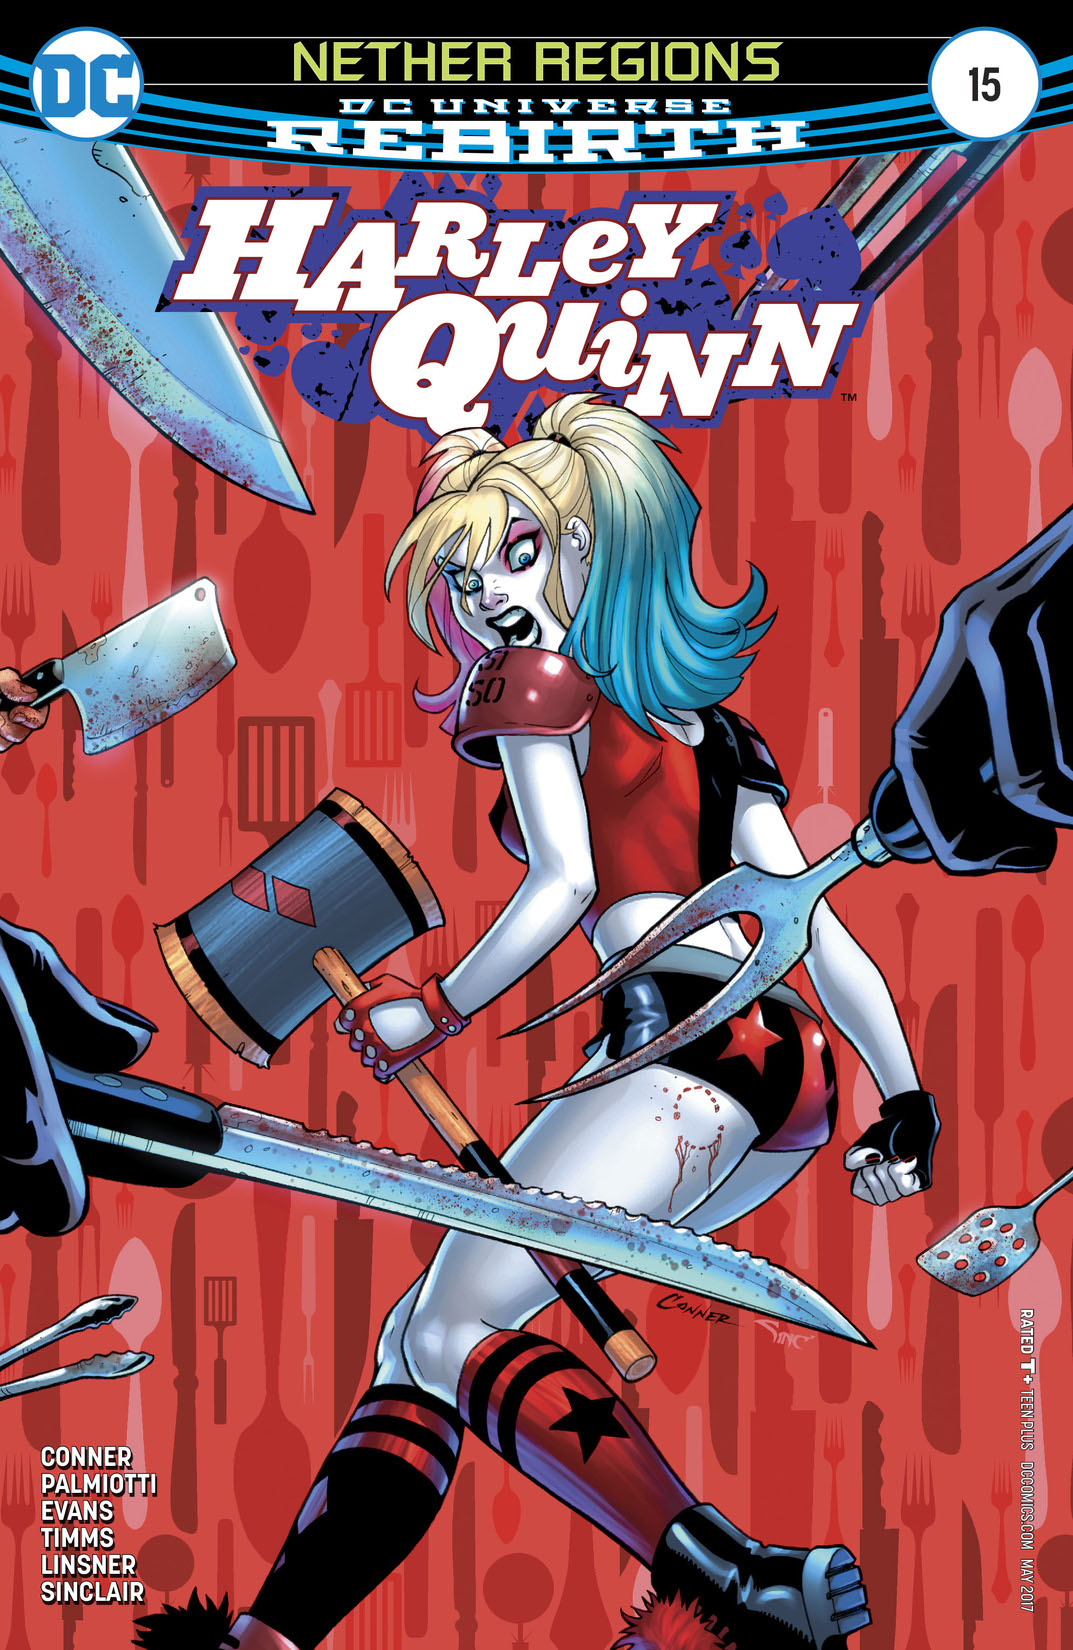 Harley Quinn (2016-) #15 preview images